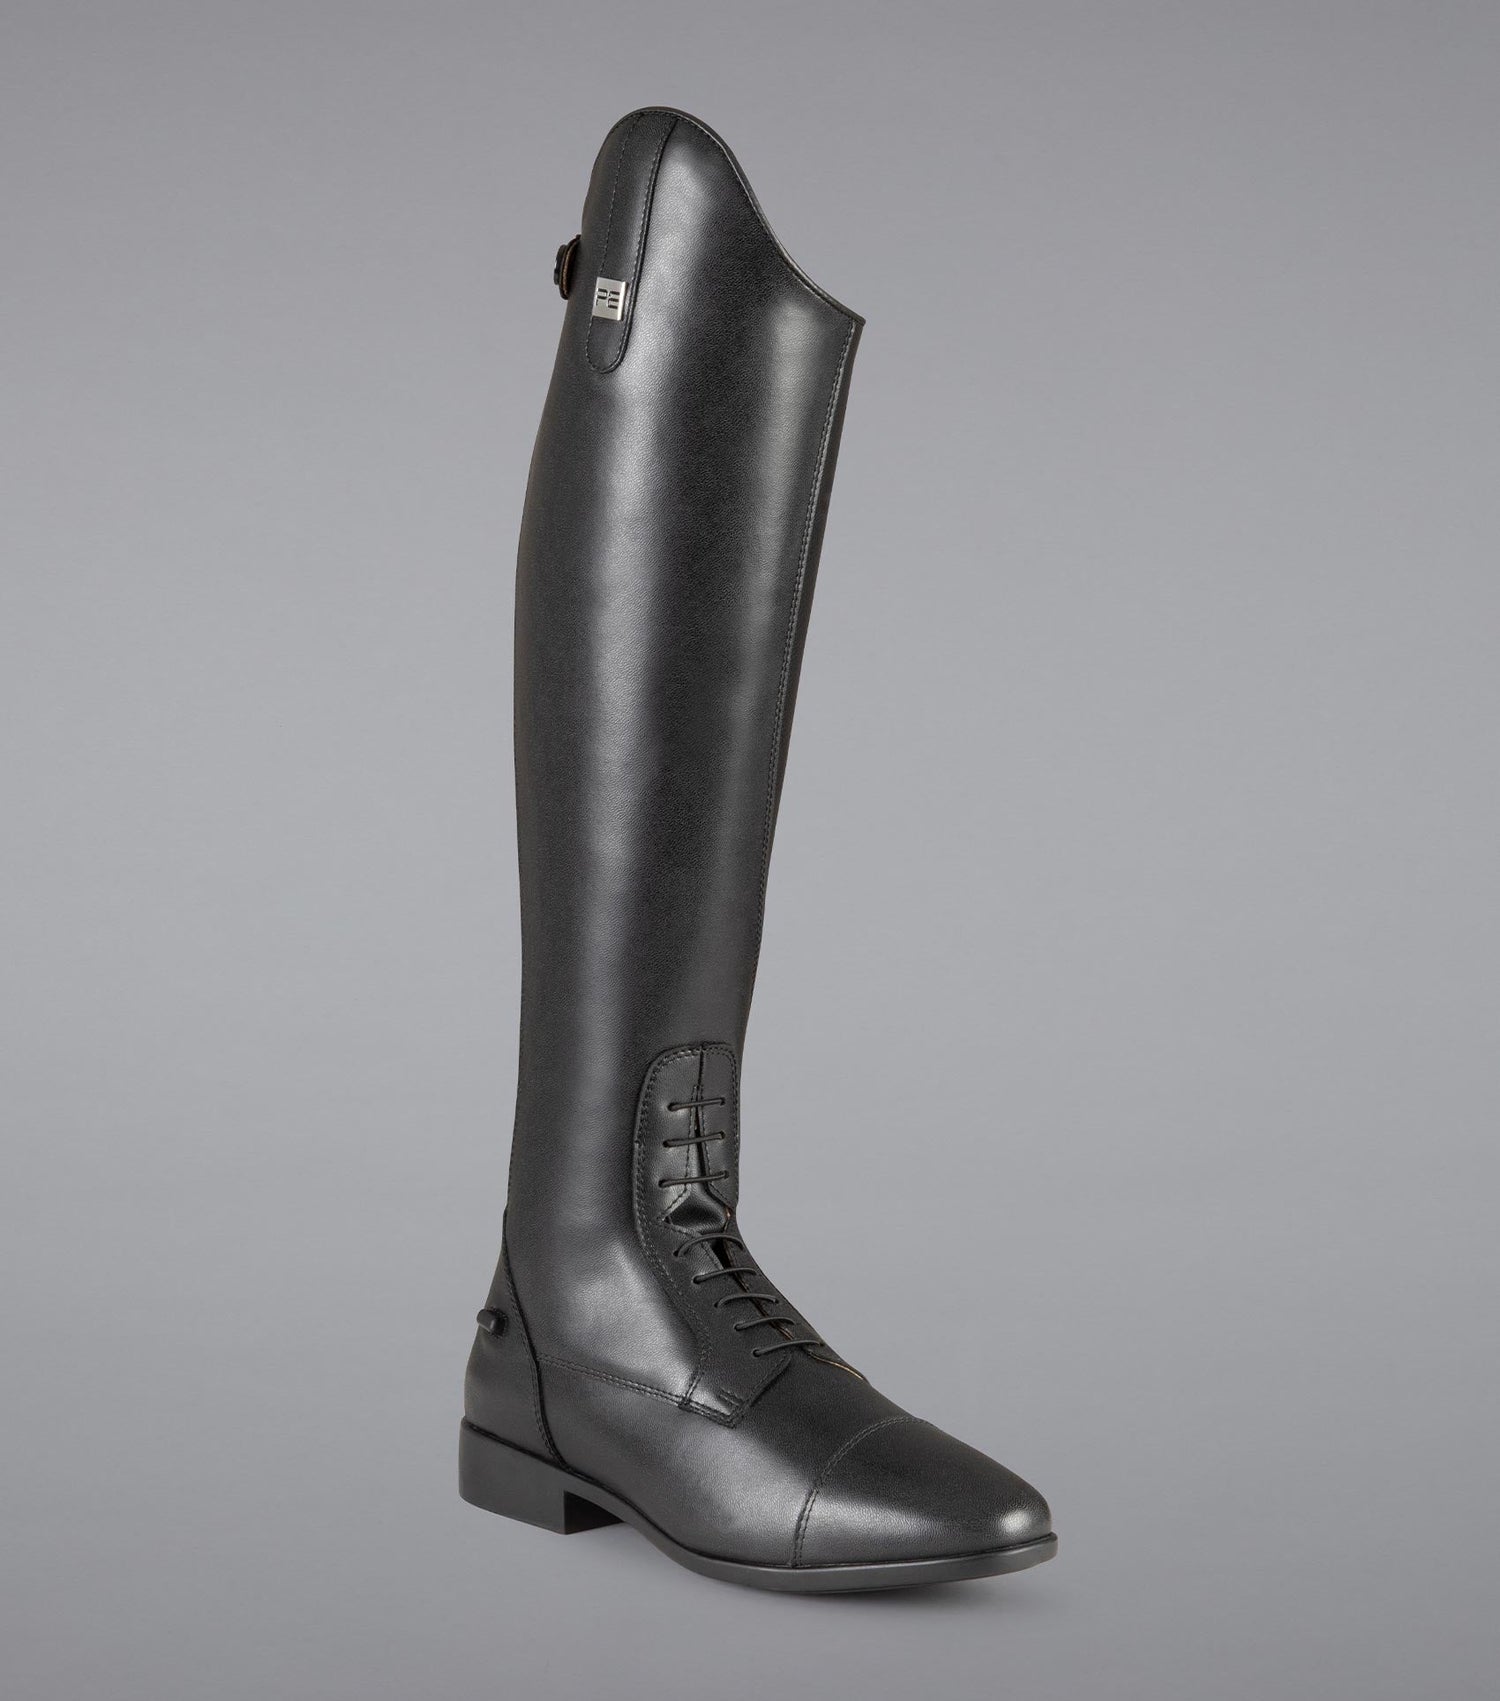 Description:Anima Ladies Synthetic Field Tall Riding Boot_Colour:Black_Position:1